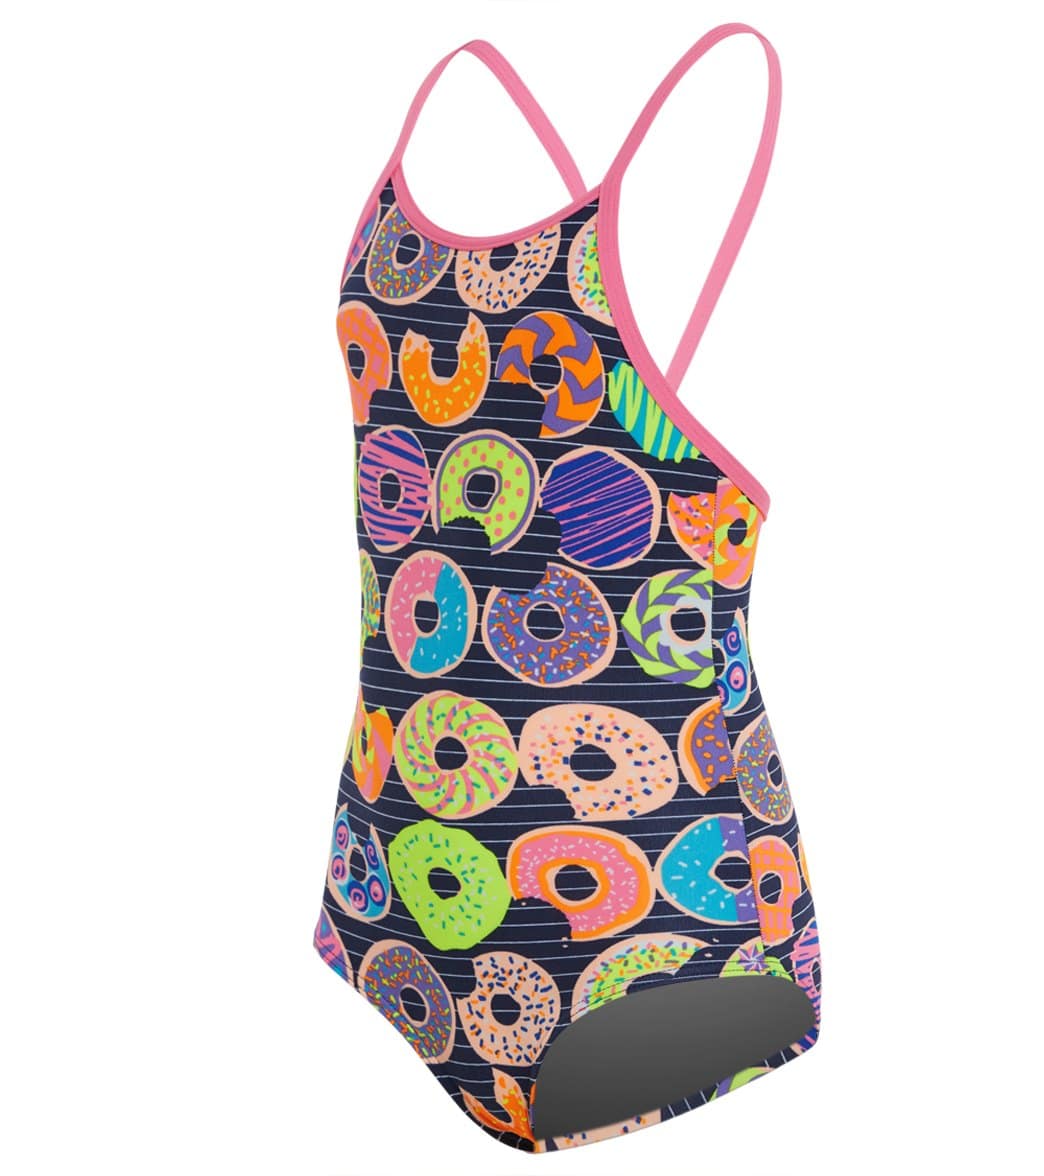 Funkita Toddler Girls Dunking Donuts One Piece Swimsuit - Multi Navy 1T Polyester - Swimoutlet.com